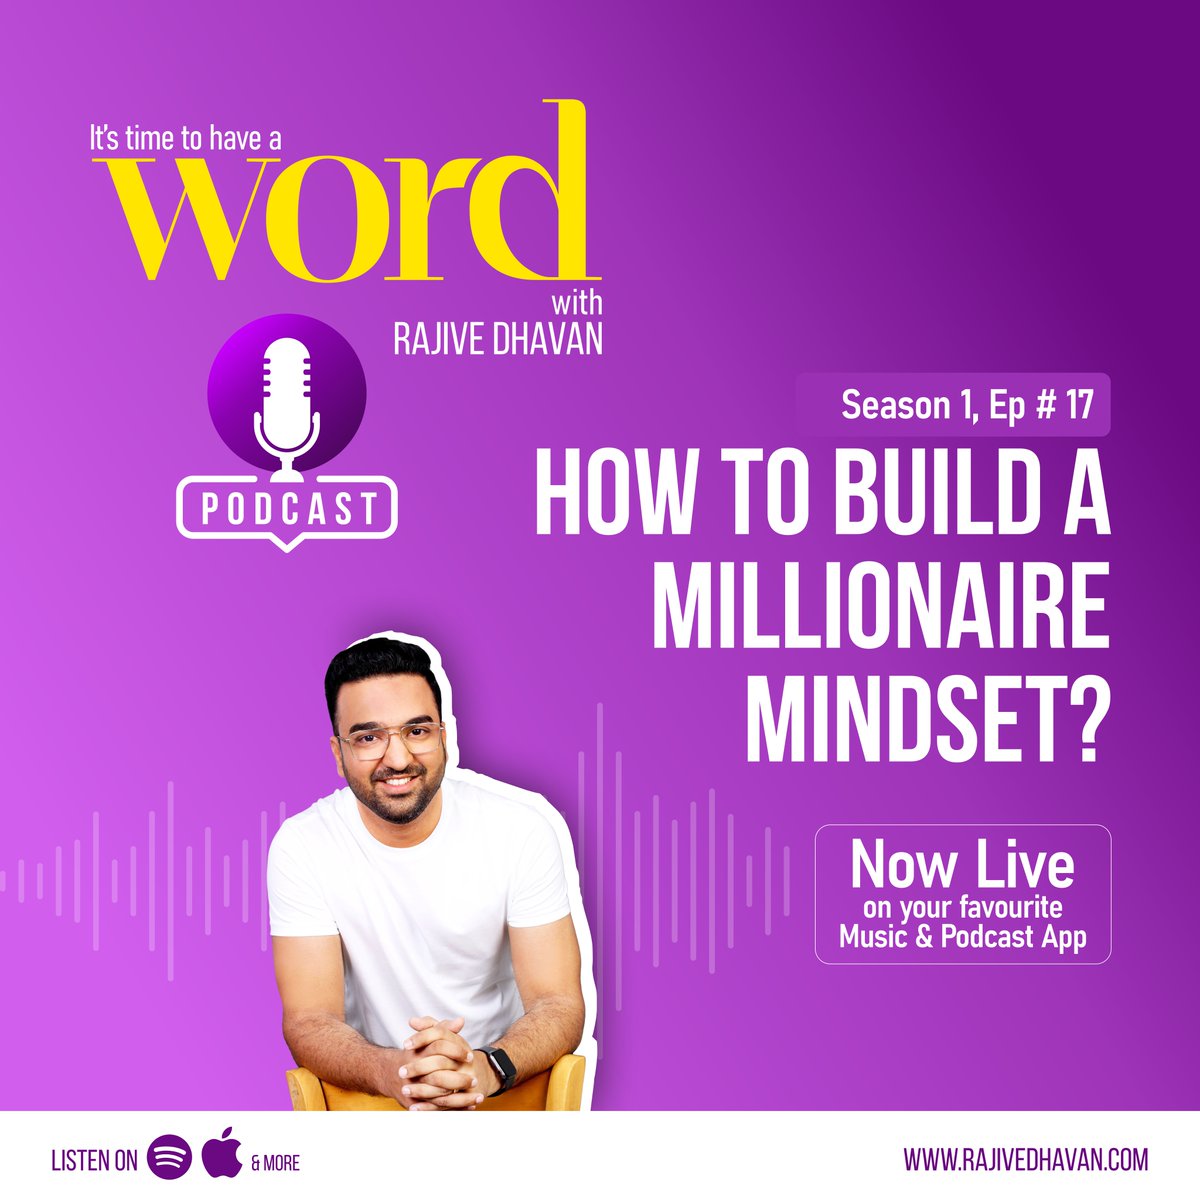 Ever wondered what could be an apt mindset to become a millionaire?

Podcast: Word with Rajive Dhavan 
Ep # 17: How to build a millionaire mindset. (Now Live) 

Check out the... Link in Bio. 🔗 
.
.
.
#Podcast #WordWithRajiveDhavan #SelfhelpPodcast #MillionaireMindset #Finance